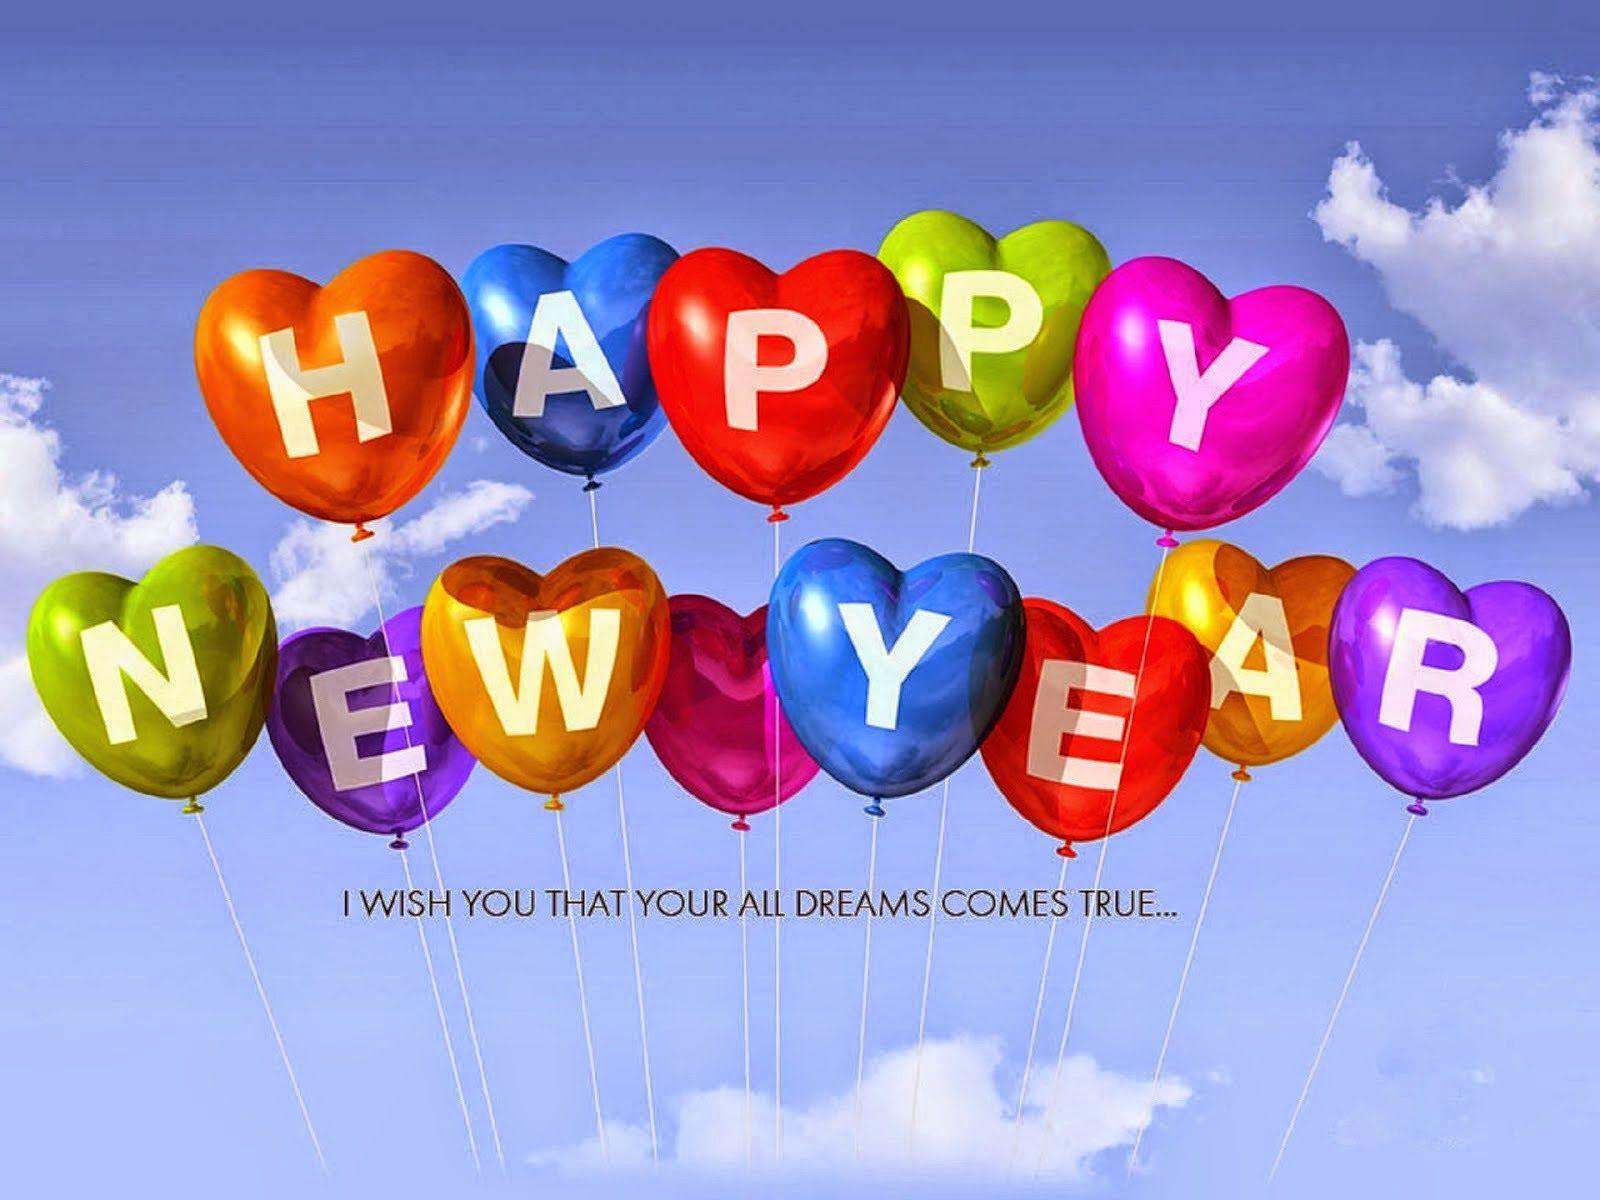 Happy New Year 2016 HD Wallpaper, Image Free Download